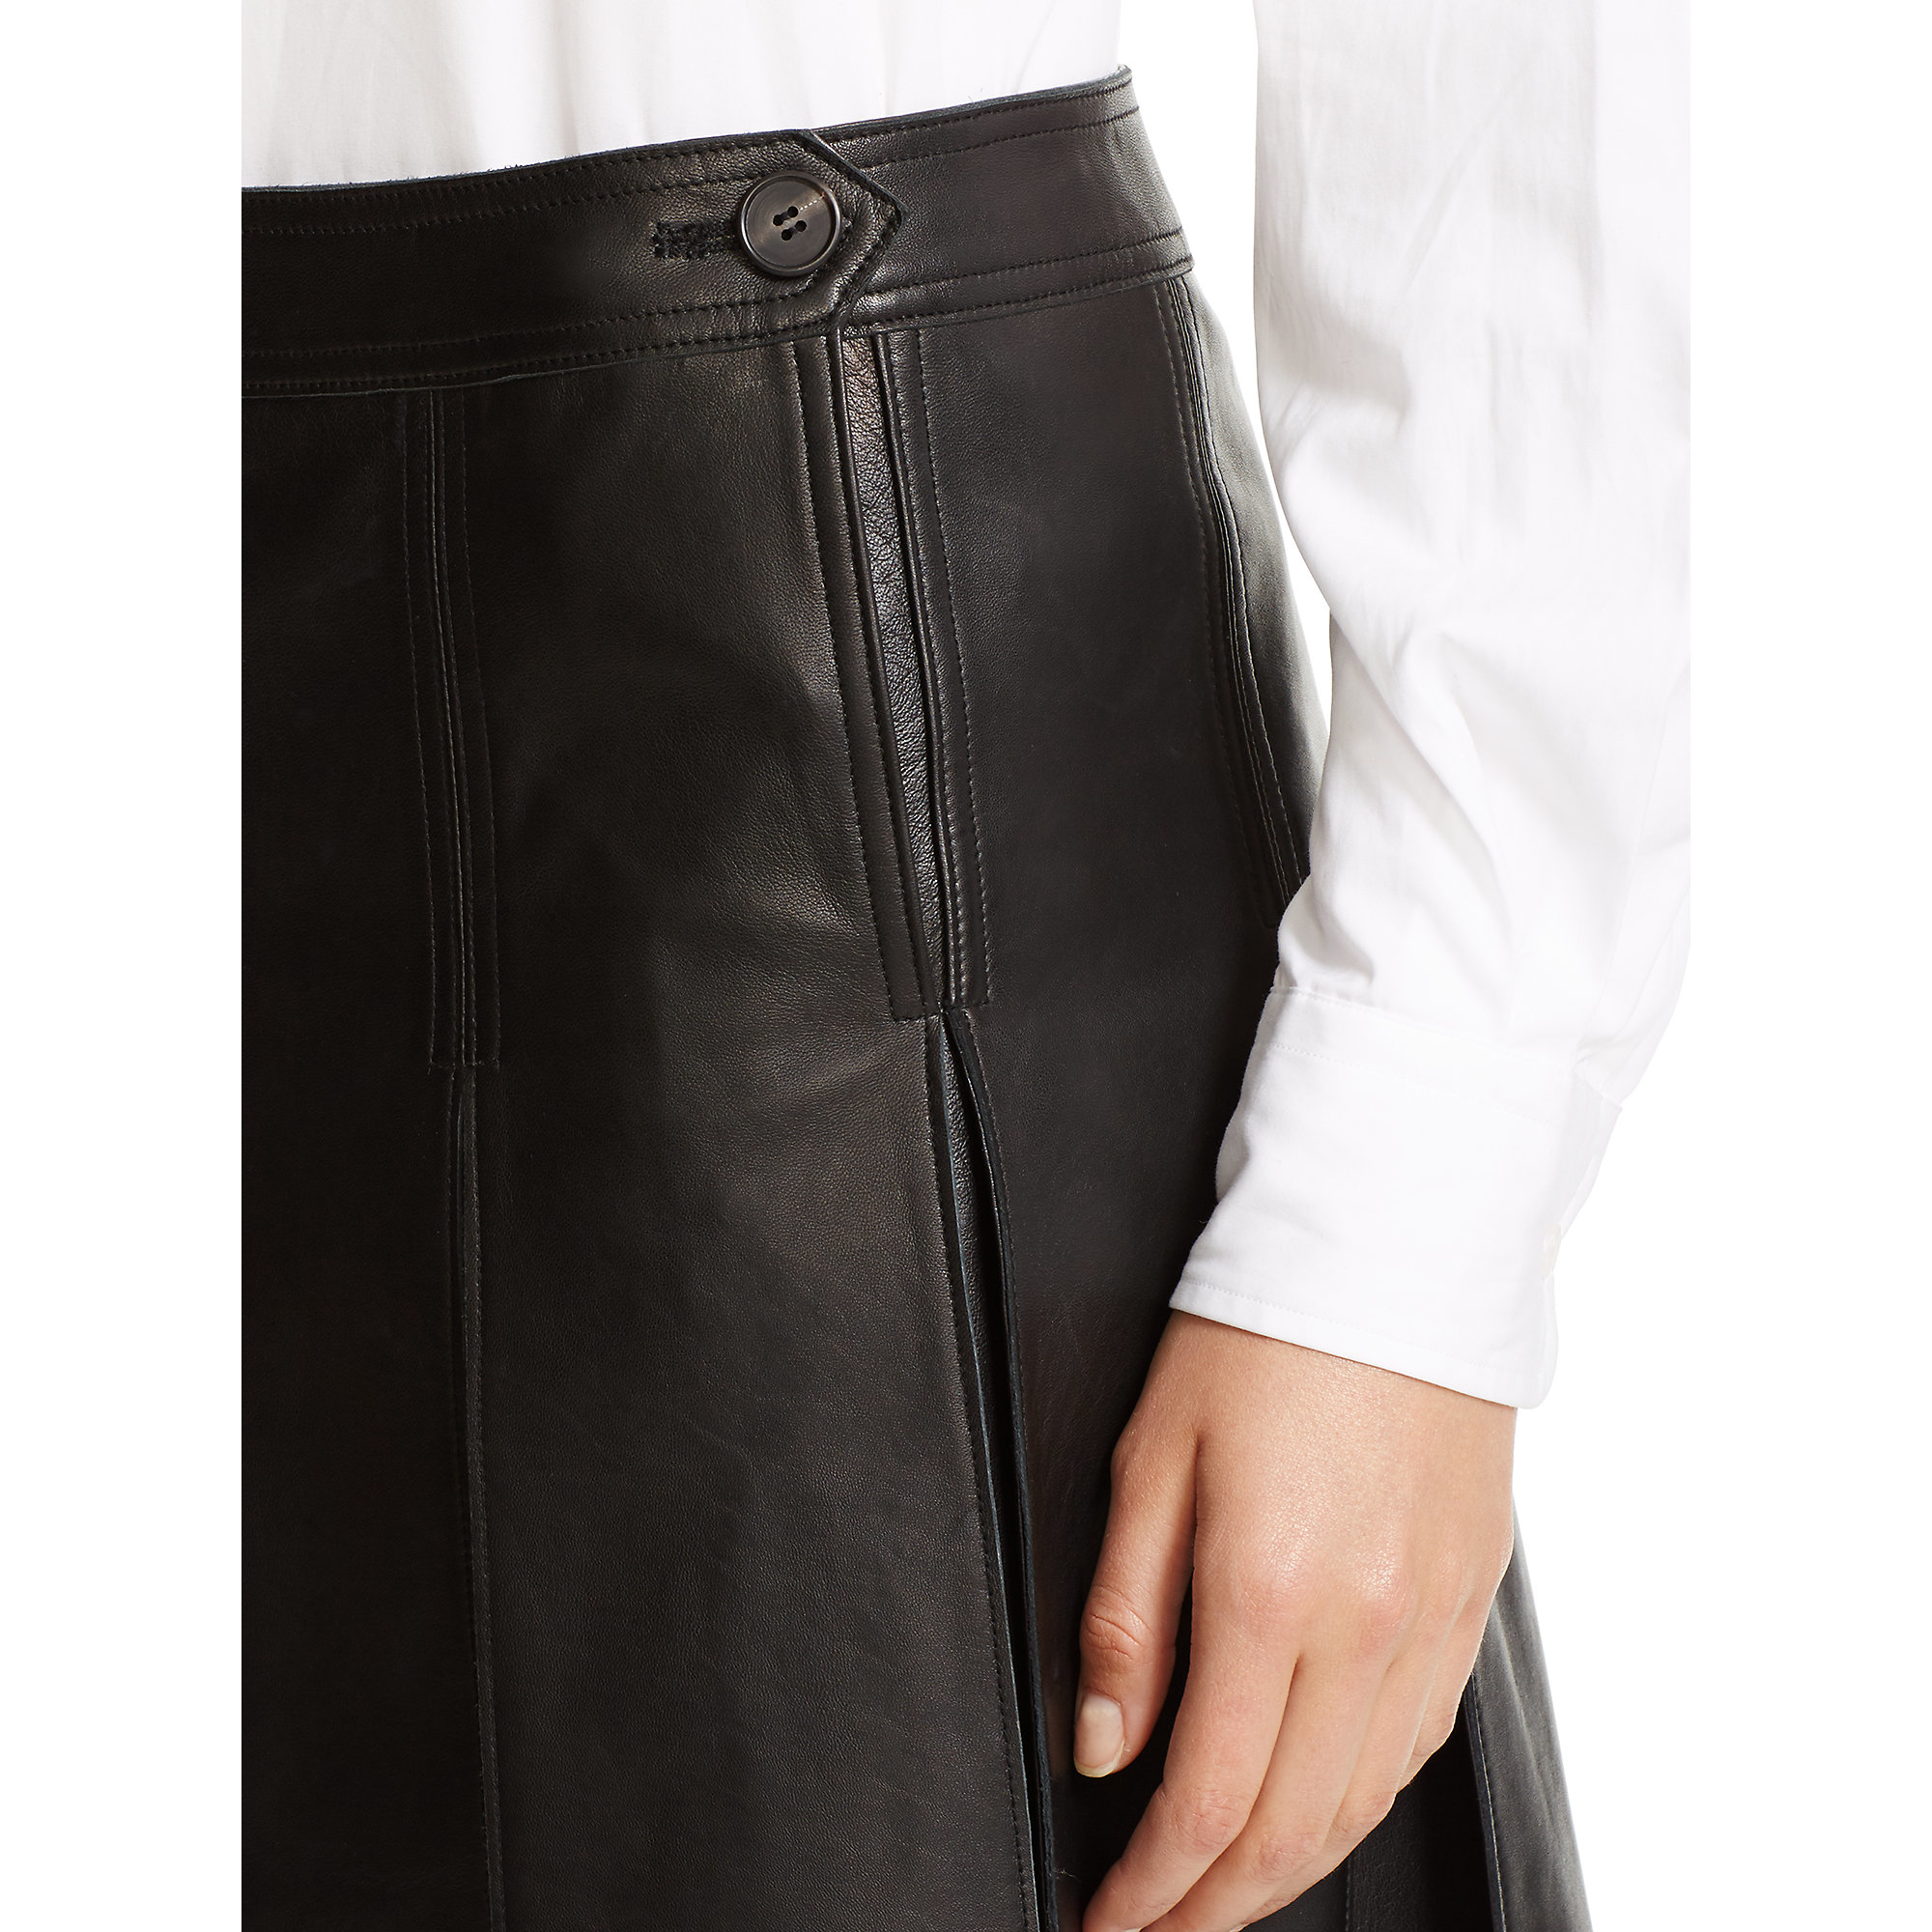 Polo Ralph Lauren Pleated Leather Skirt in Black | Lyst